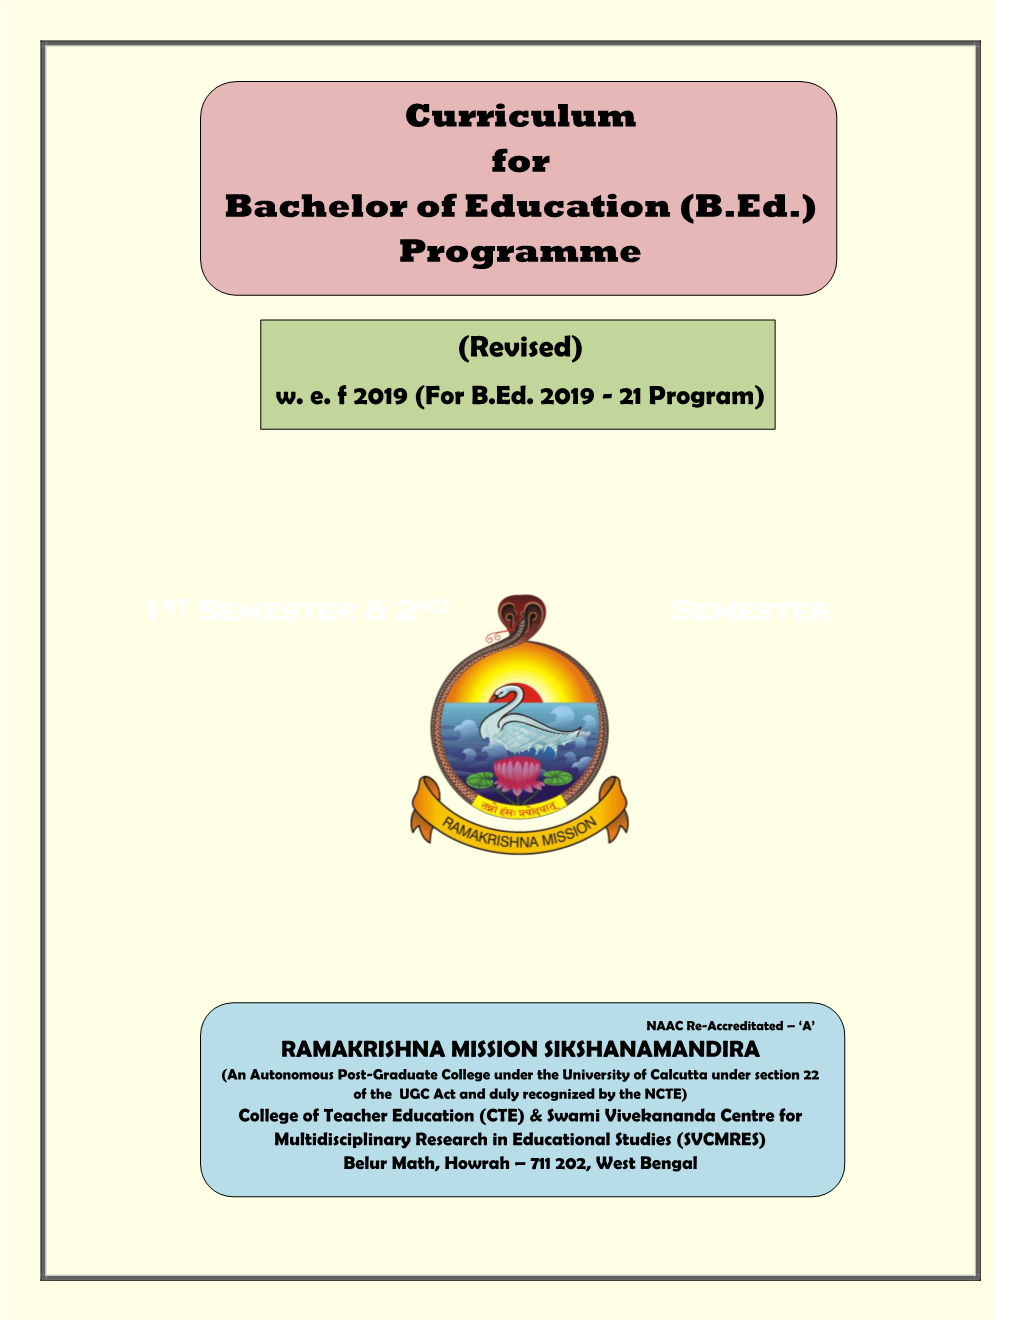 Curriculum for Bachelor of Education (B.Ed.) Programme